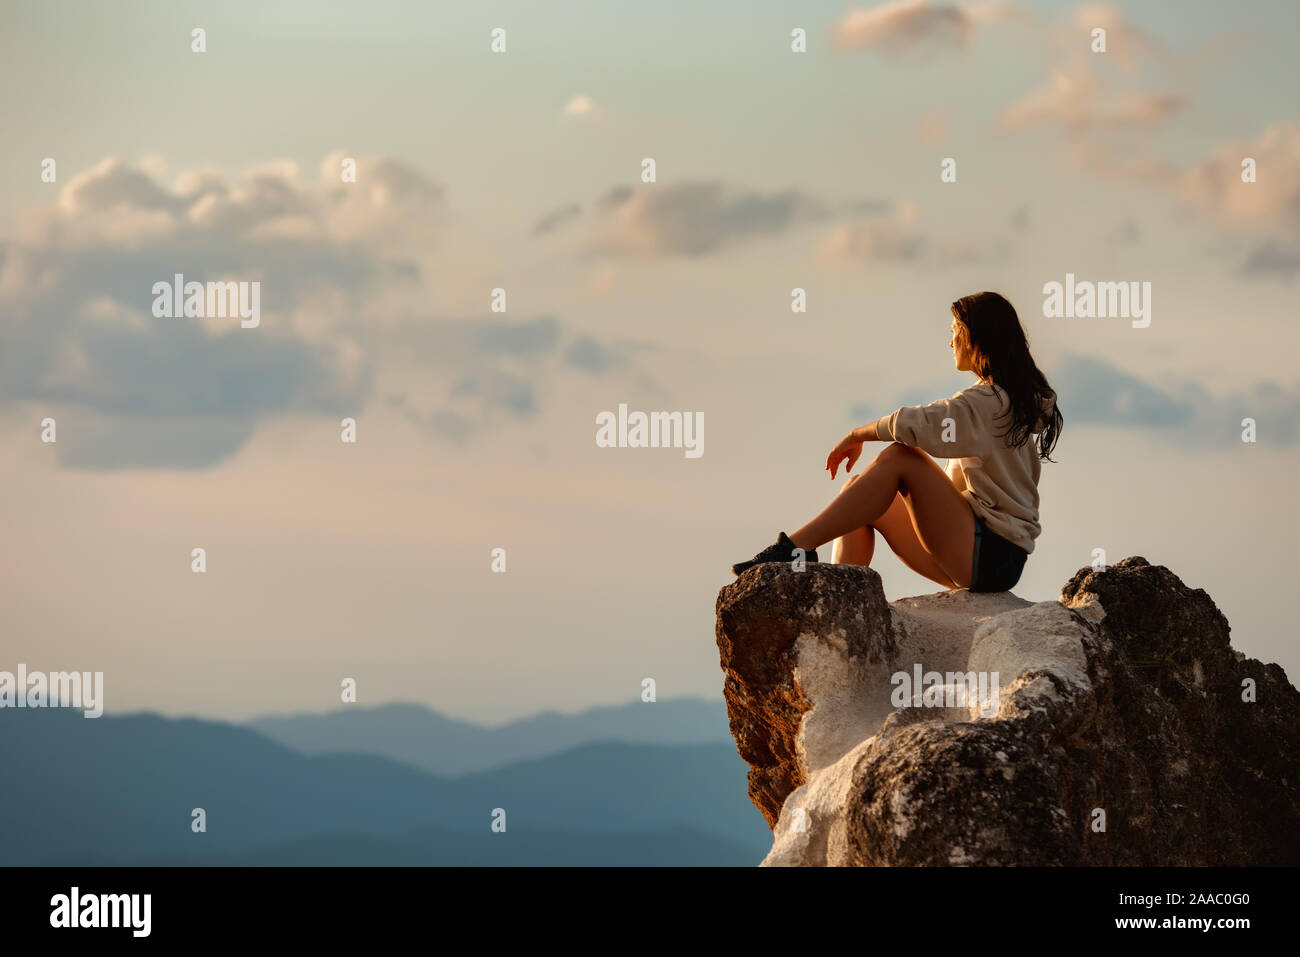 One sporty girl sits on big rock and looks at sunset sky and mountains Stock Photo